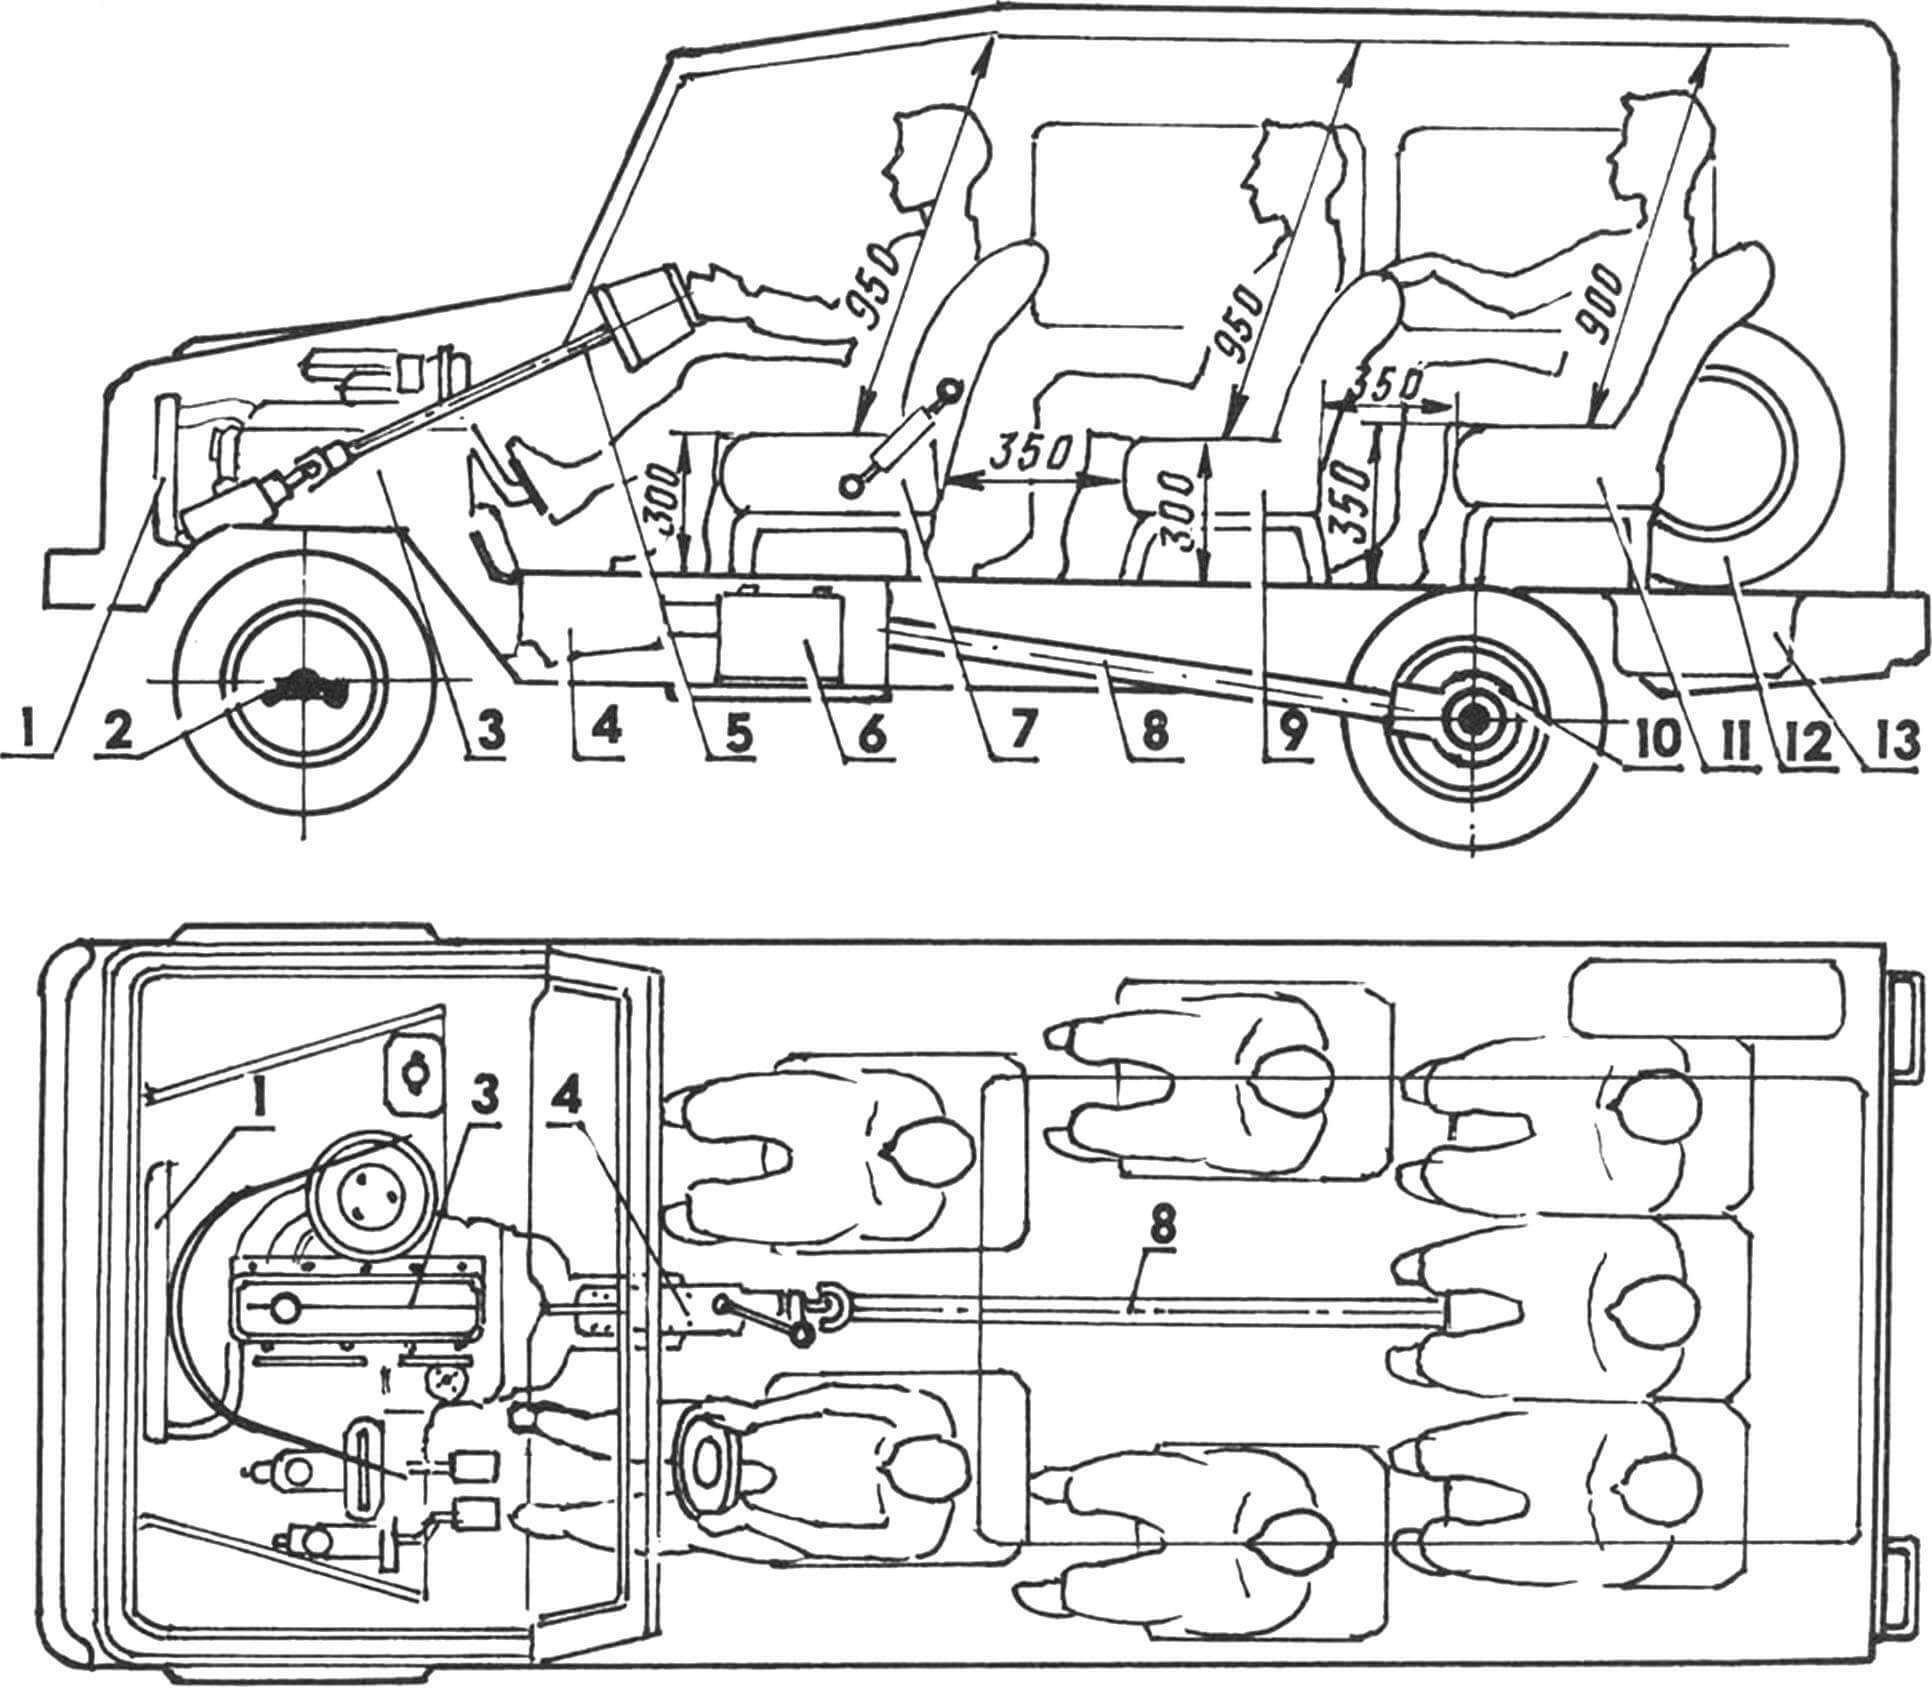 The layout of the car and the arrangement of seats in the cabin